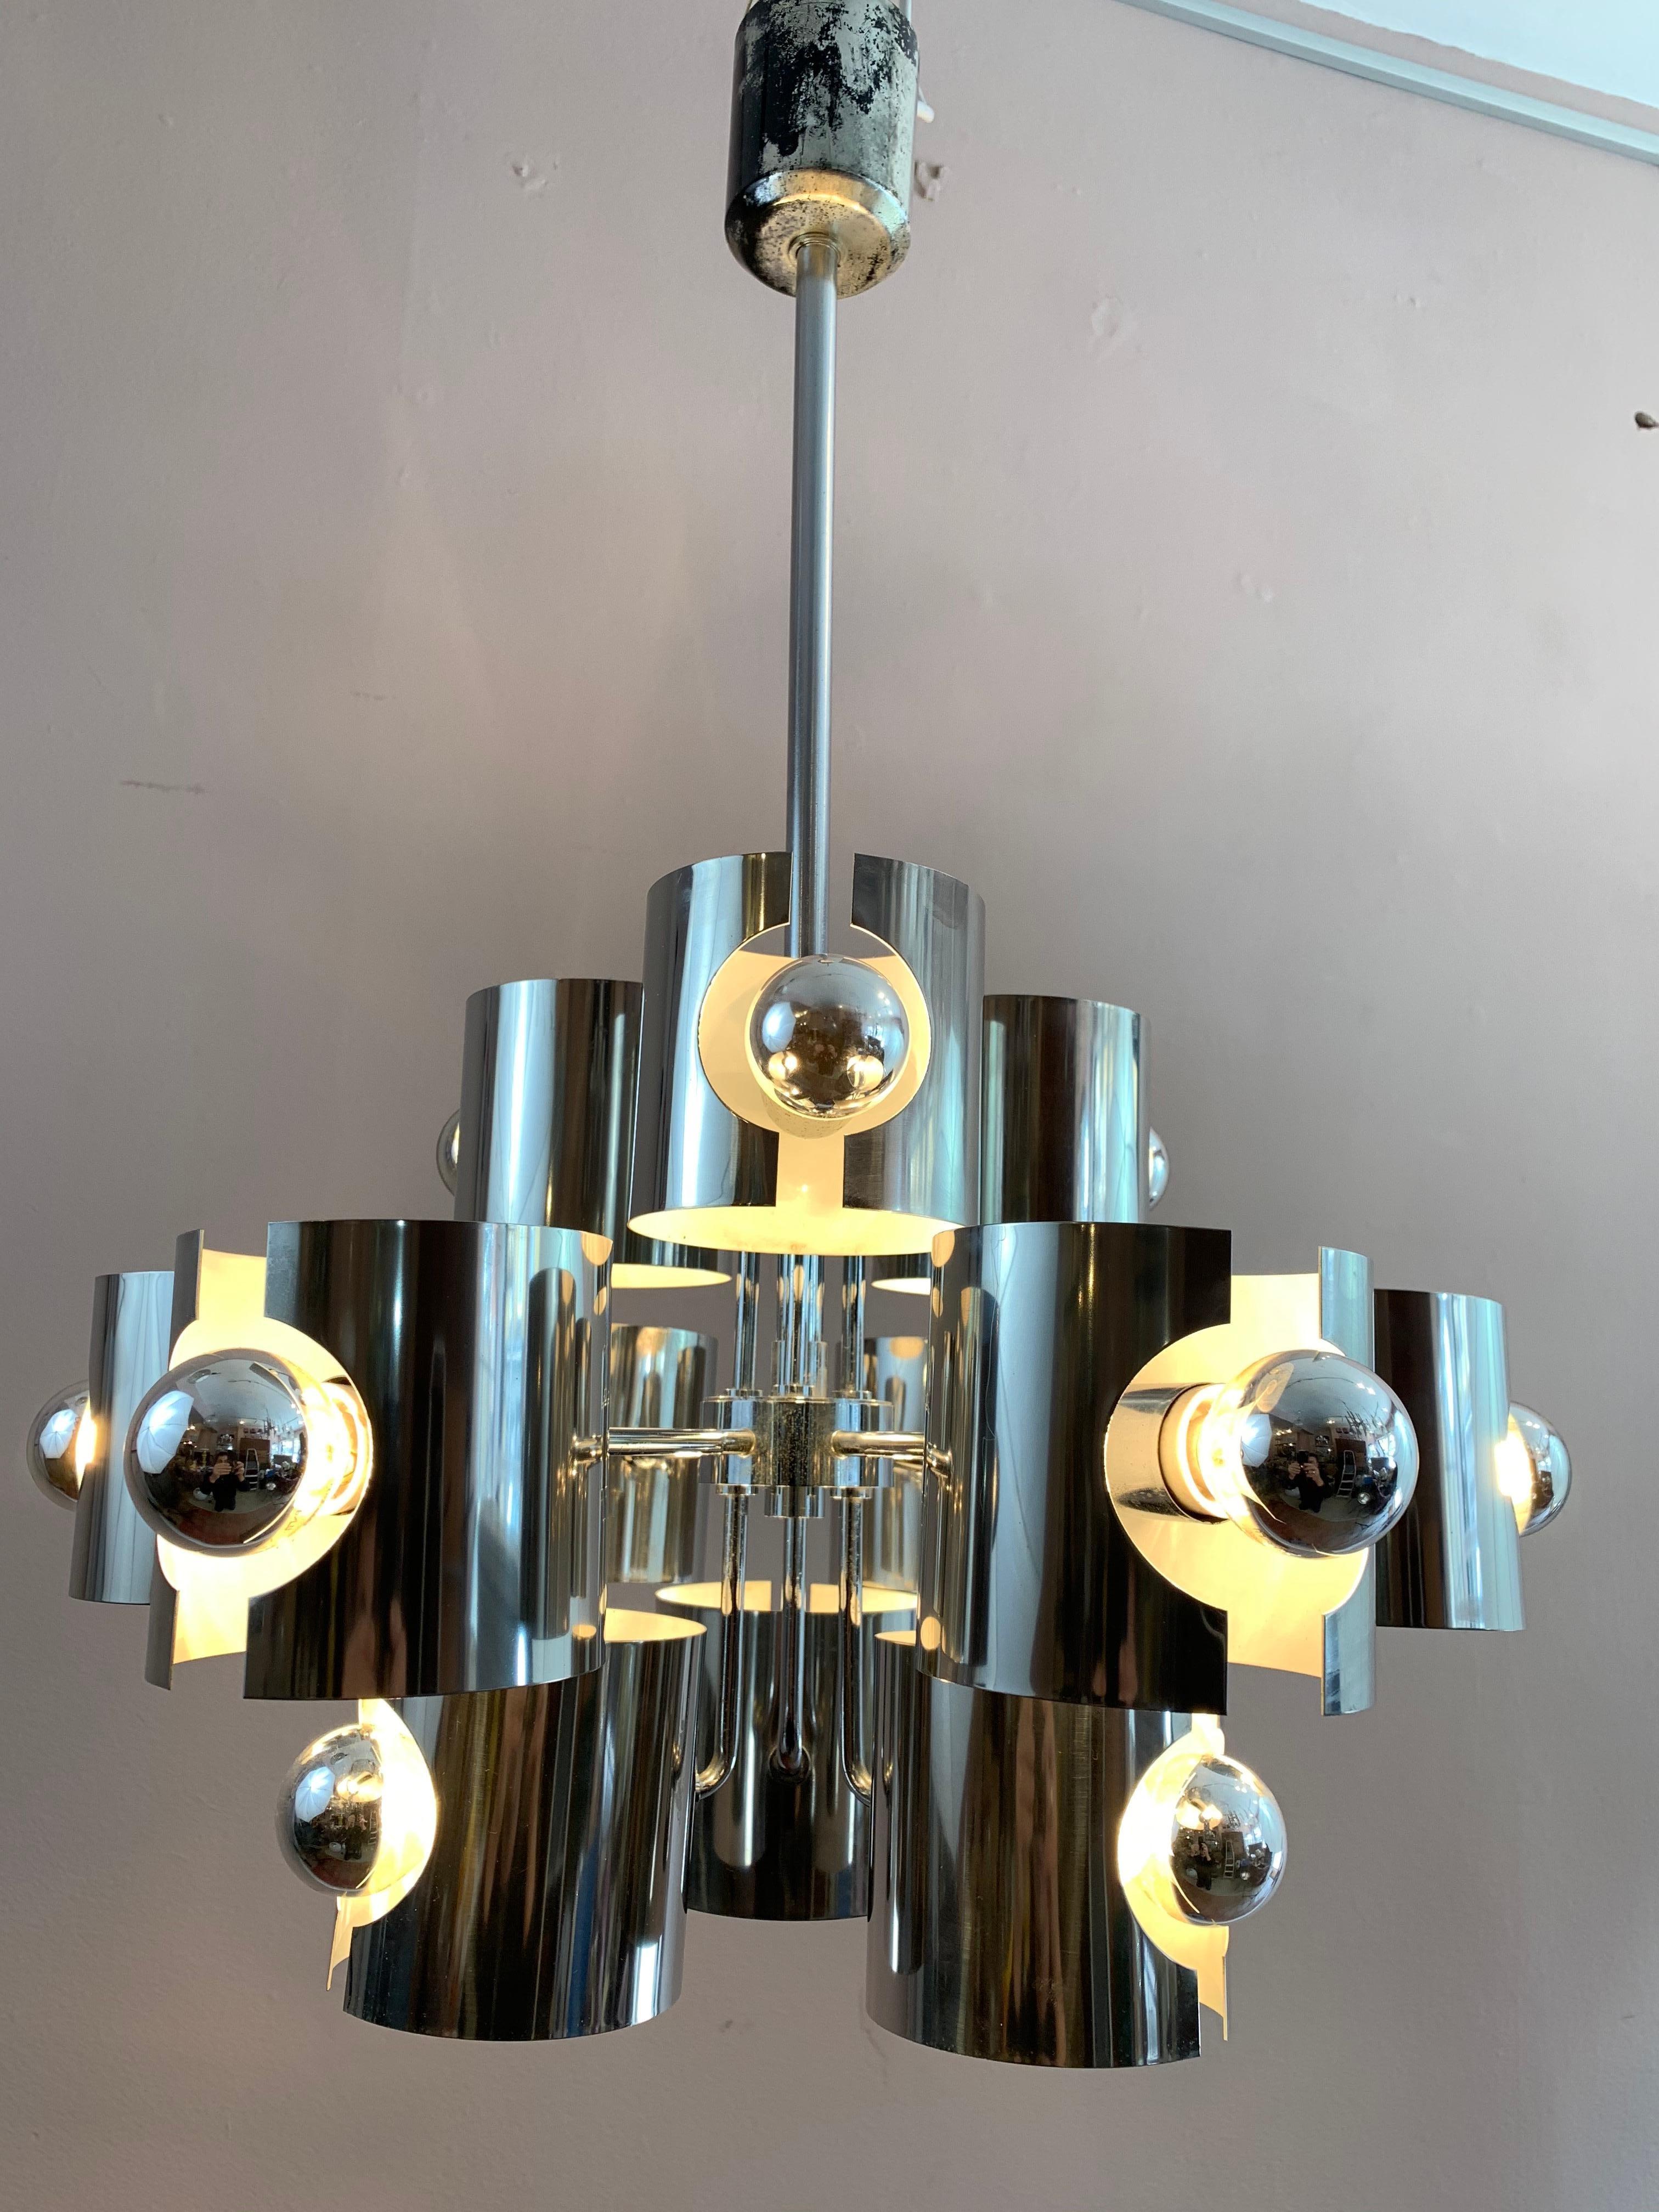 1970s Gaetano Sciolari abstract chrome ceiling hanging light. Each of the twelve sculptured shades, with lacquered white interiors, holds each bulb in place. The shades can either be turned vertically or horizontally as shown in the last few images.